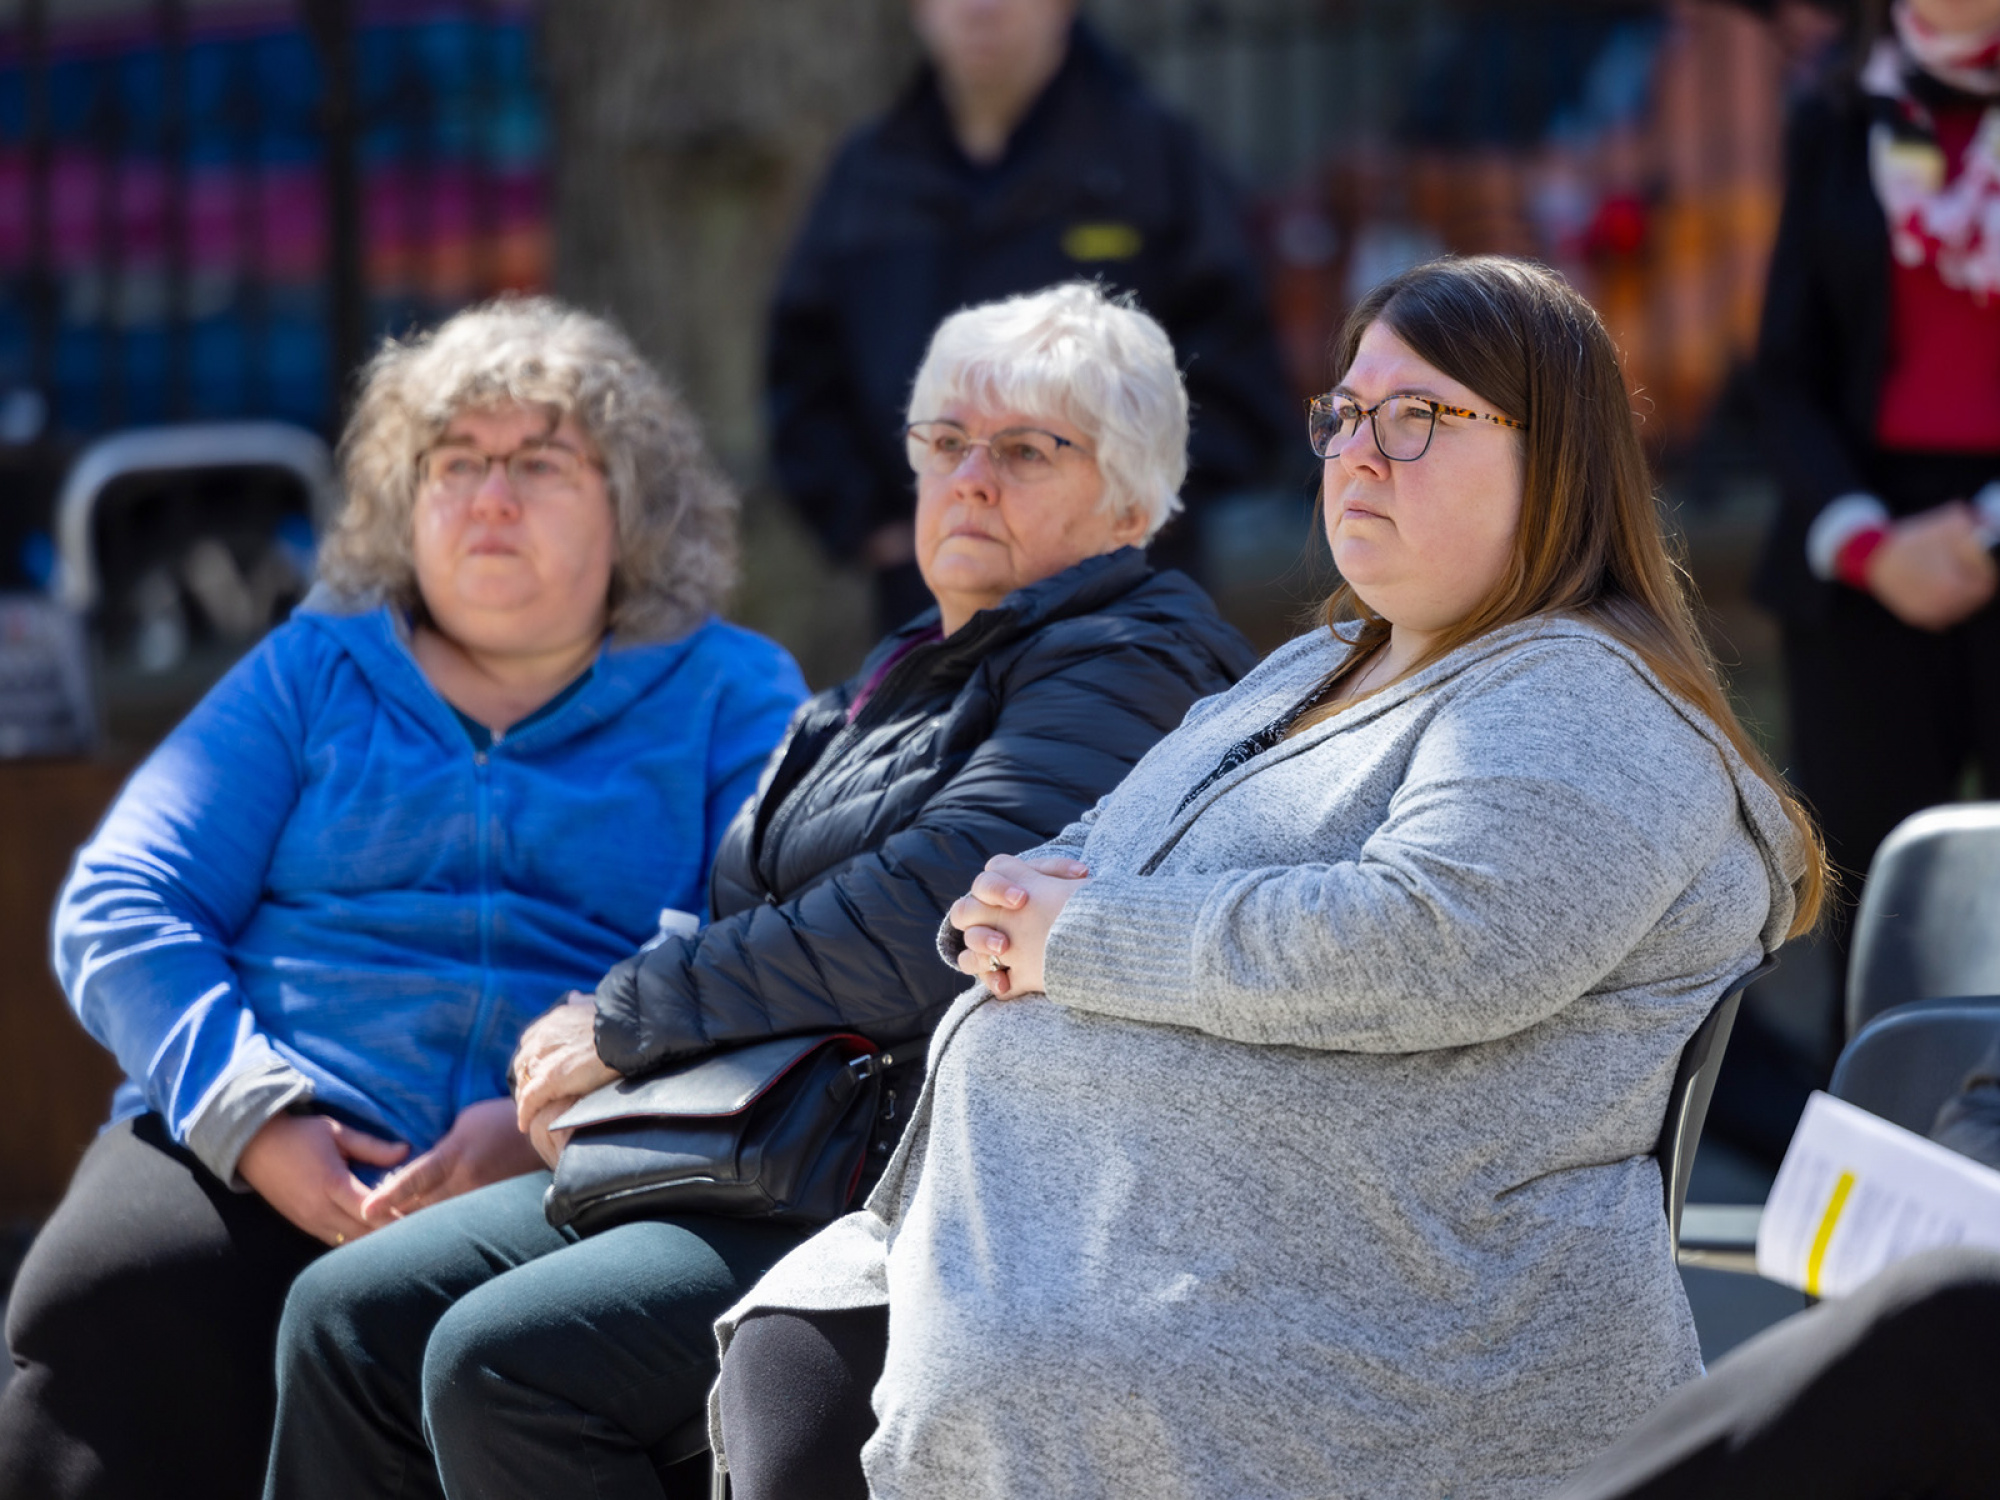 Ron Beck’s family from left to right: daughter Deanna, wife Barbara, and daughter, Nicki. The Beck family sat together at the Day of Mourning ceremony where Nicki shared stories of her father and the devastating loss to her family when Ron died at work on April 25, 2004.